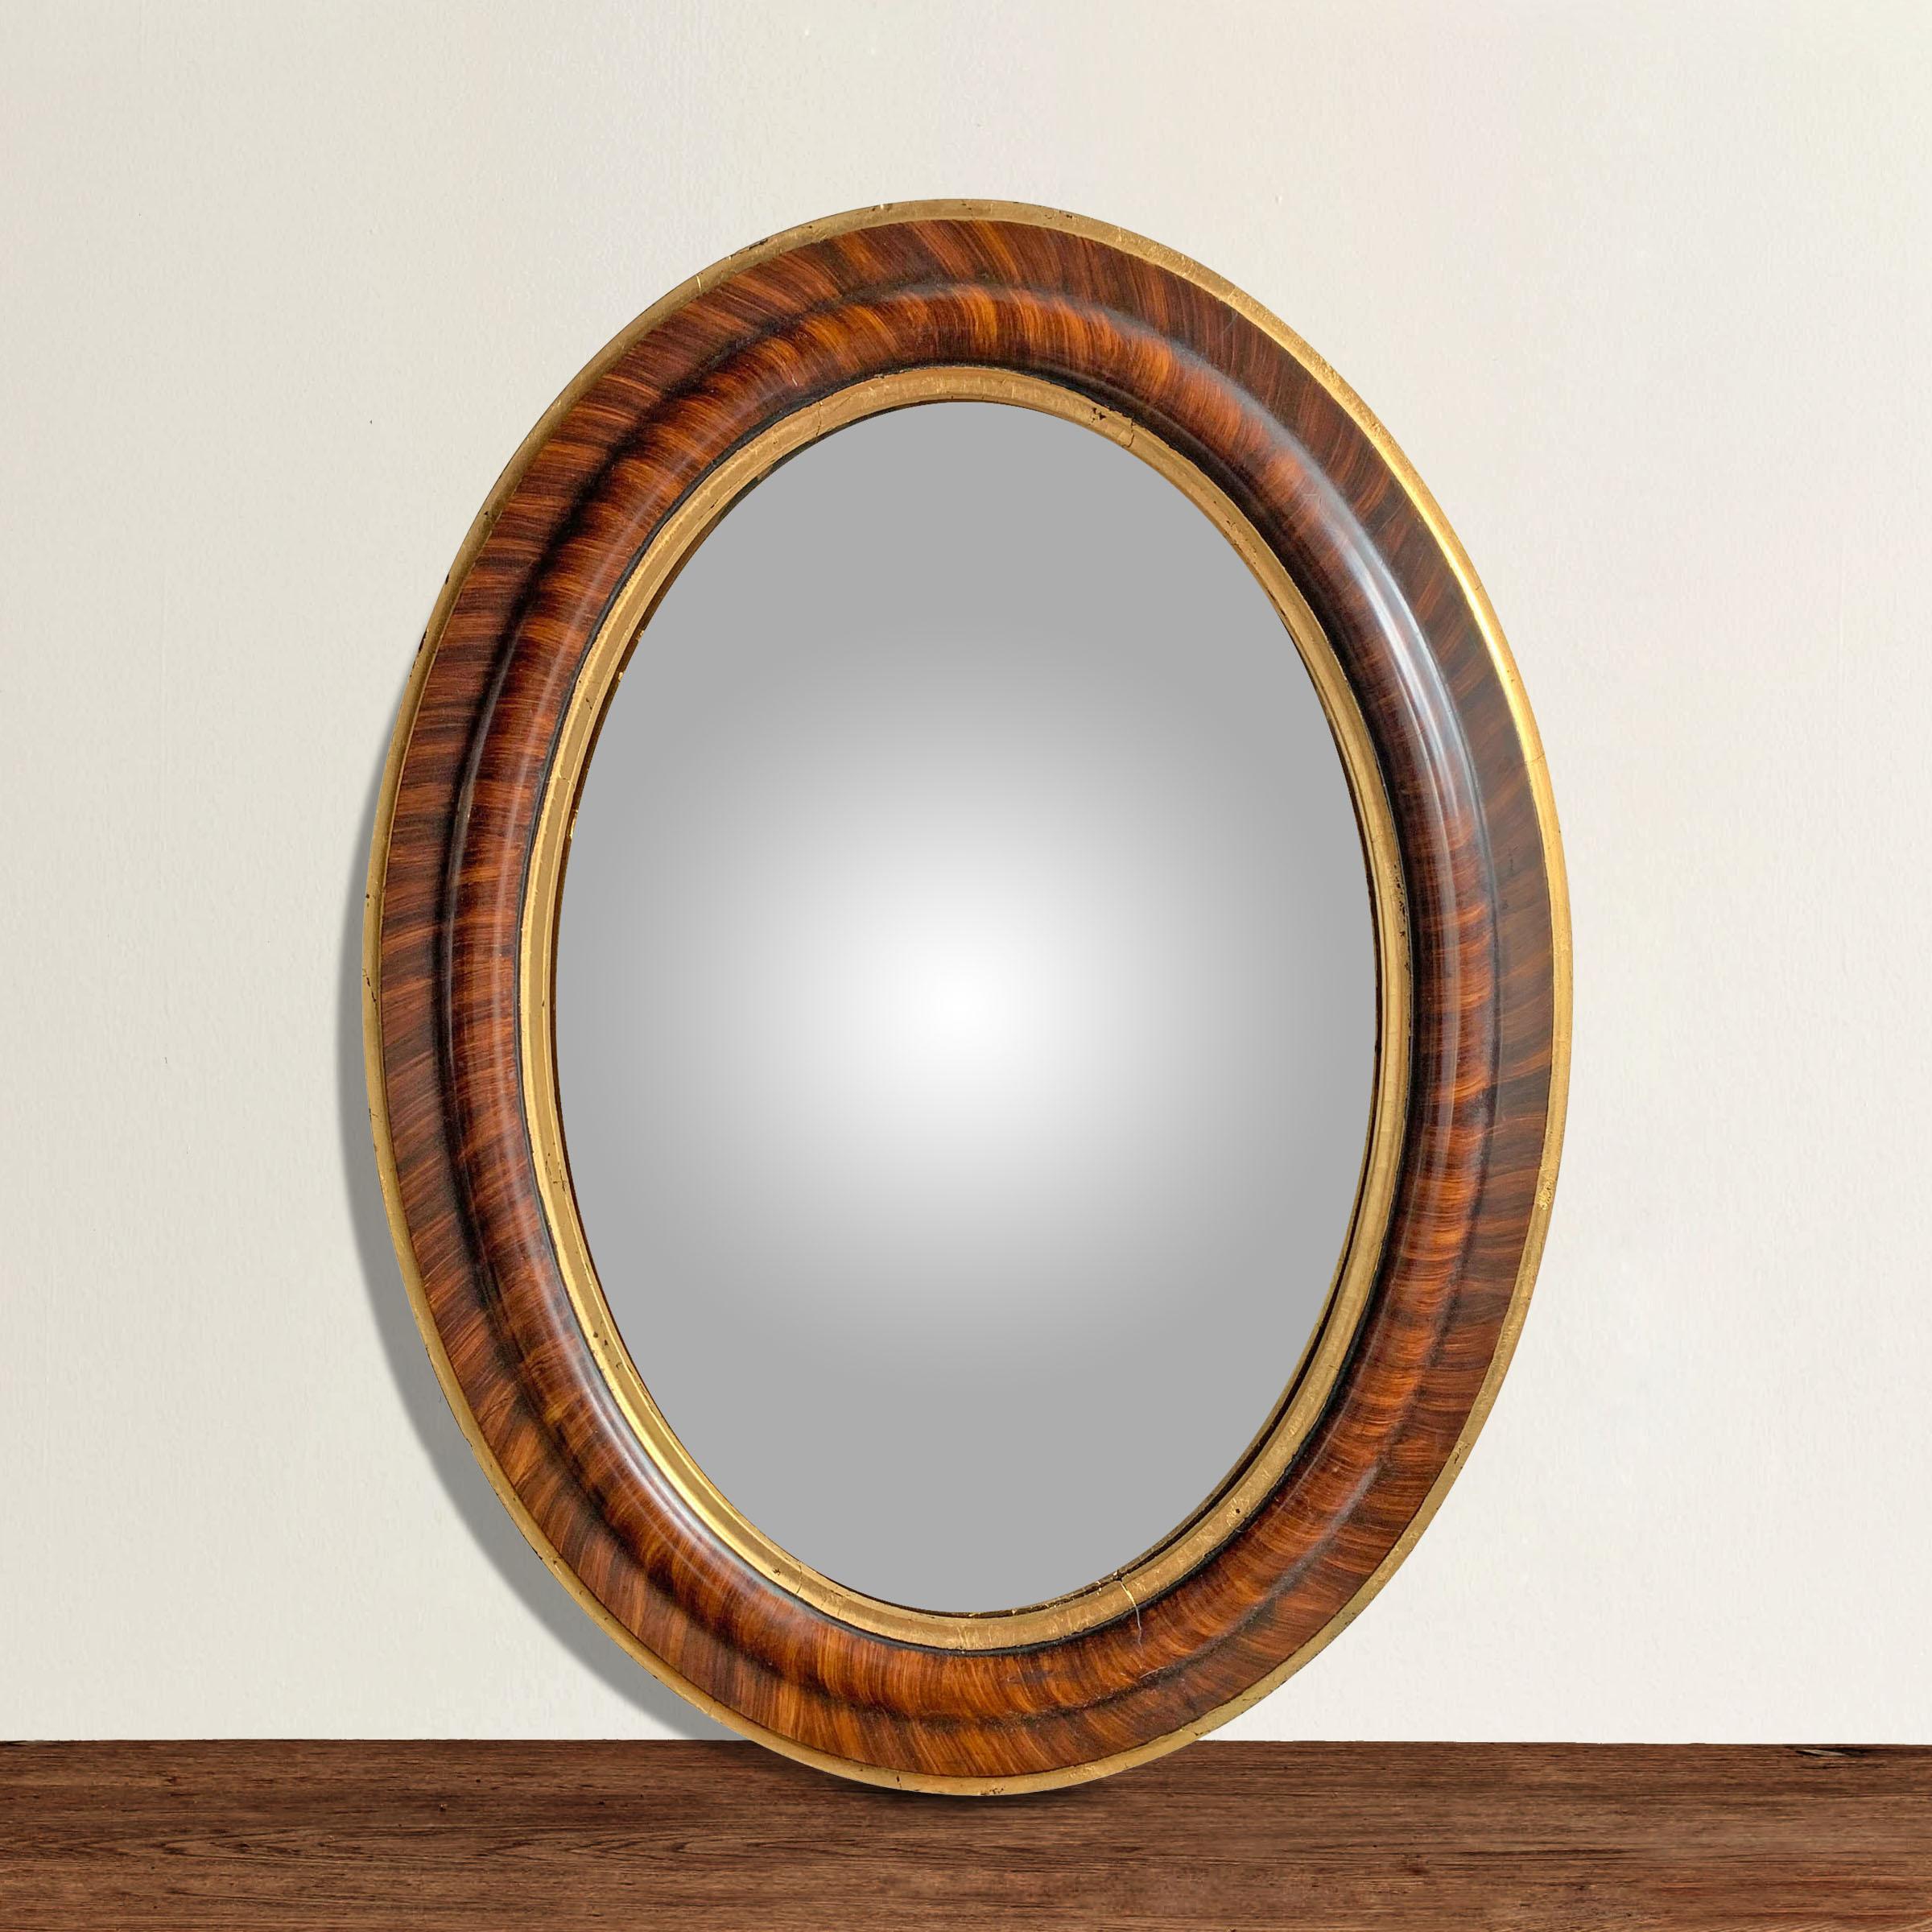 A 19th century American faux grain painted oval framed convex mirror with a hand-applied gold leaf inner and outer edge.